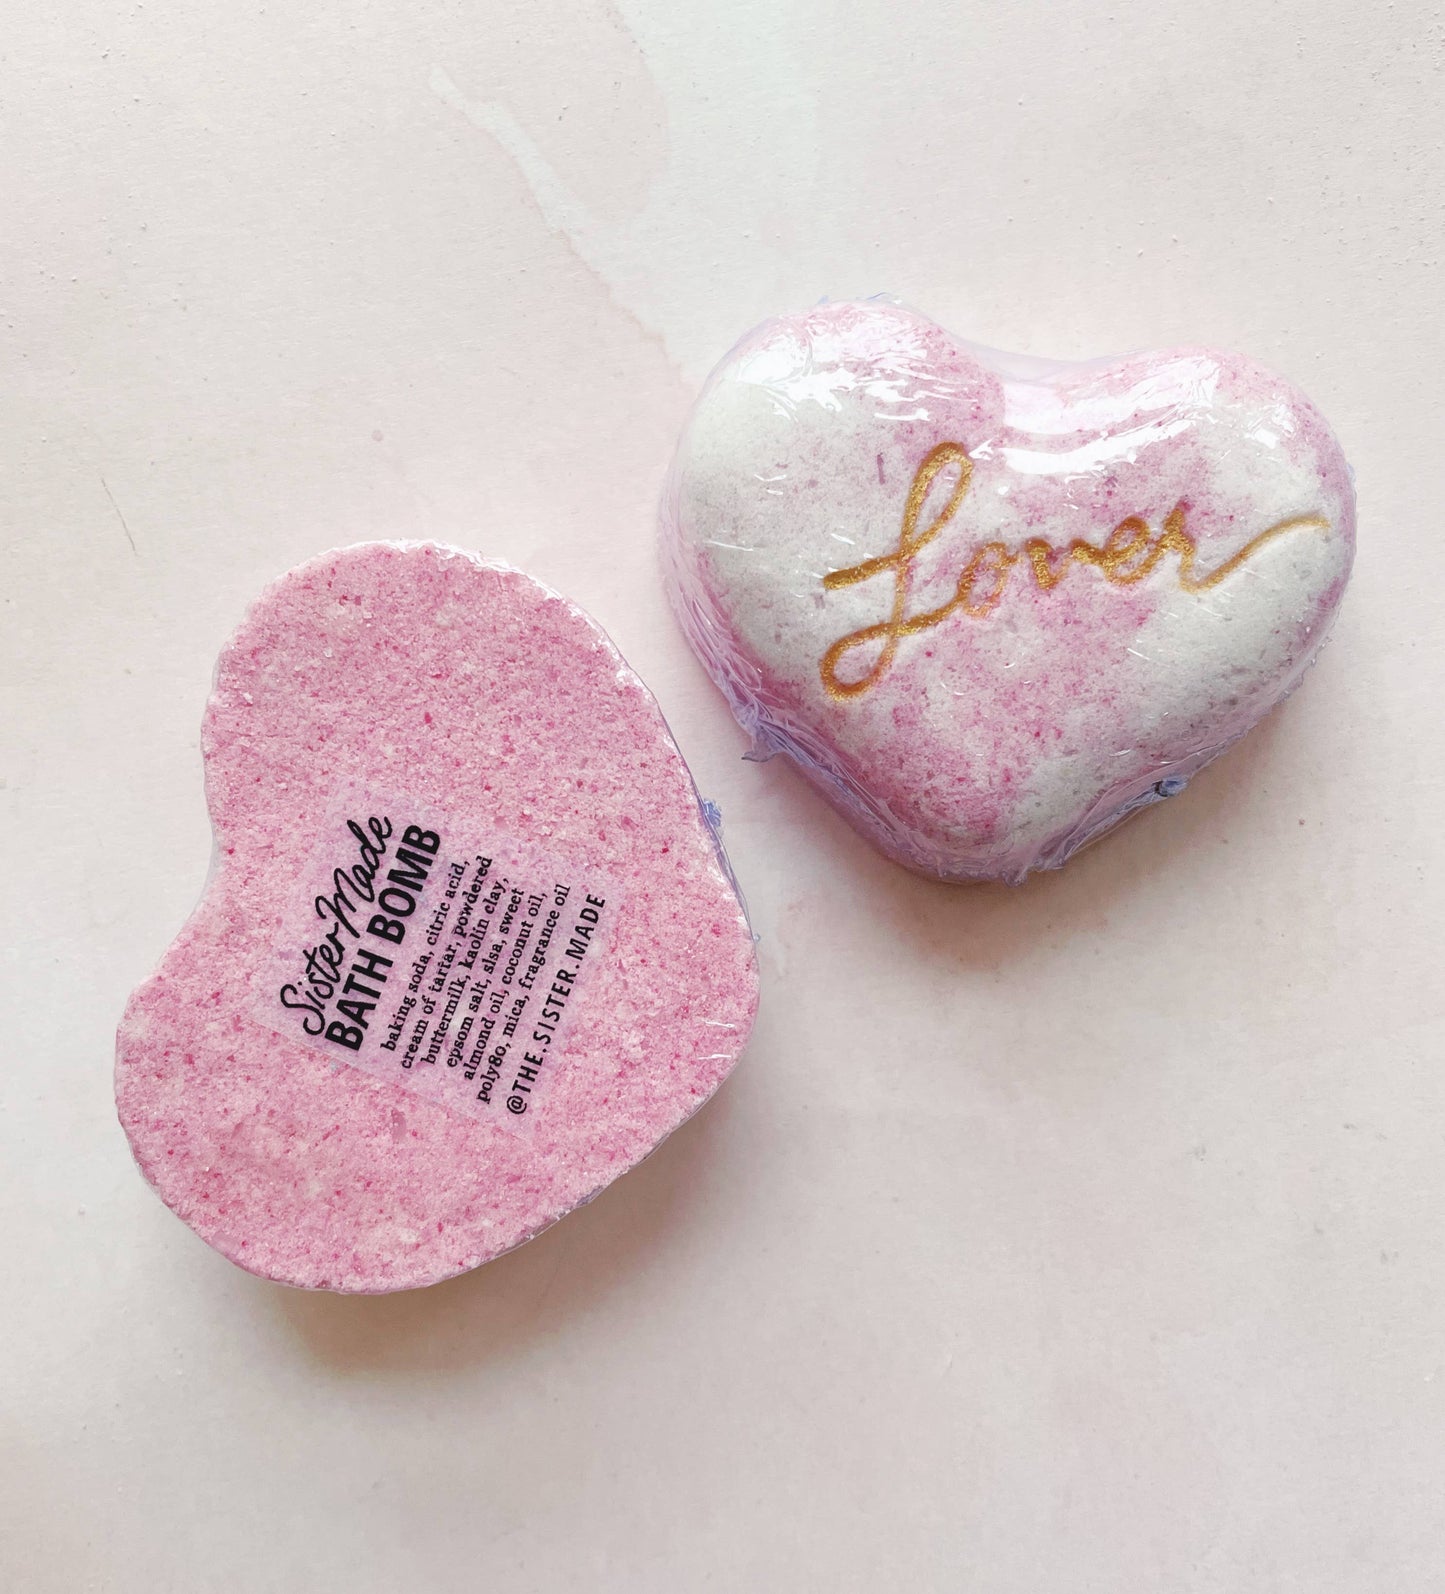 The Sister Made - Lover Heart Bath Bomb